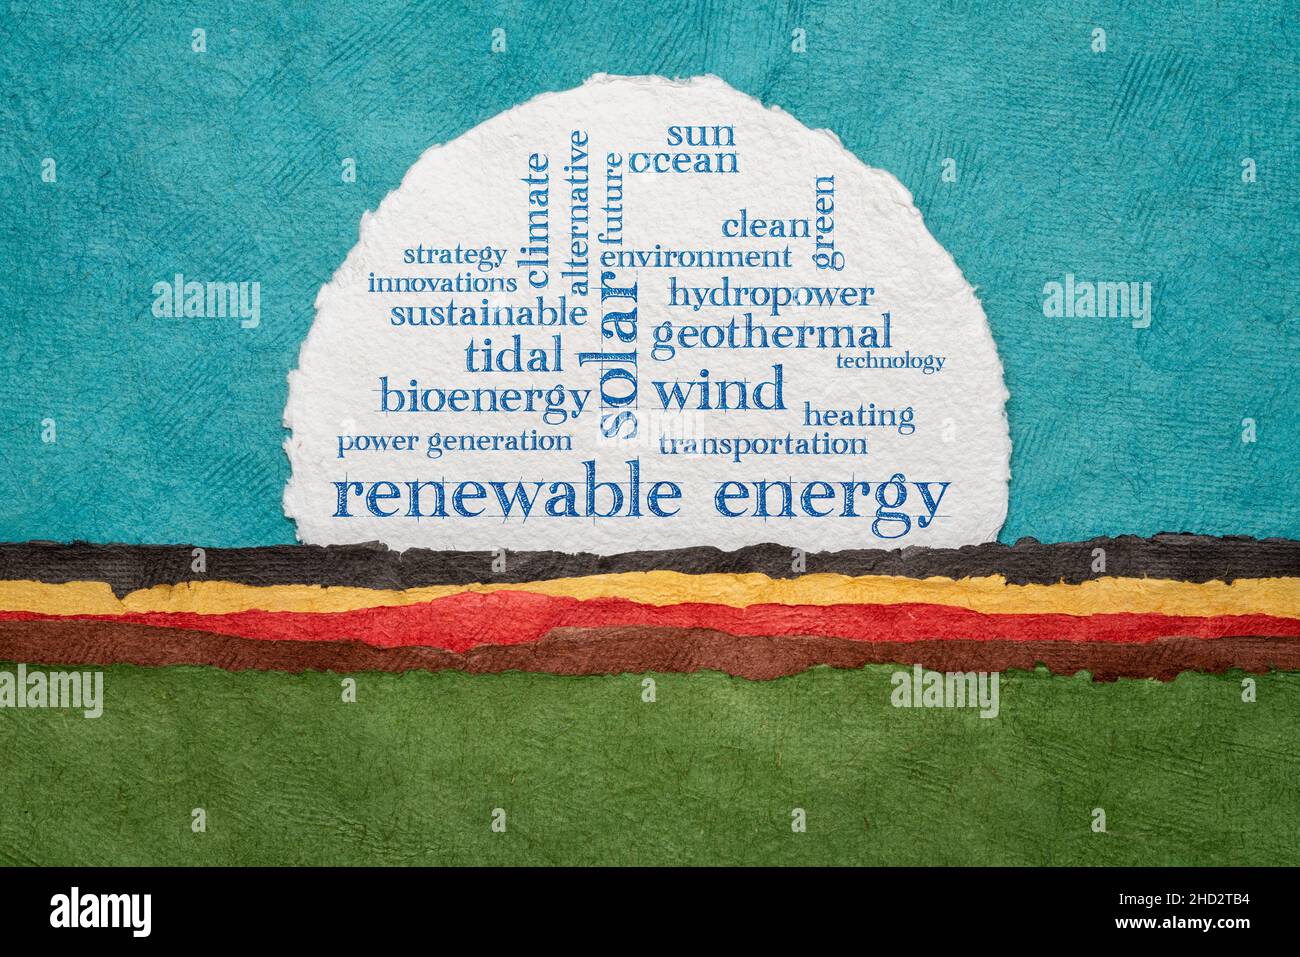 renewable energy word cloud on a circular watercolor paper against colorful abstract landscape Stock Photo